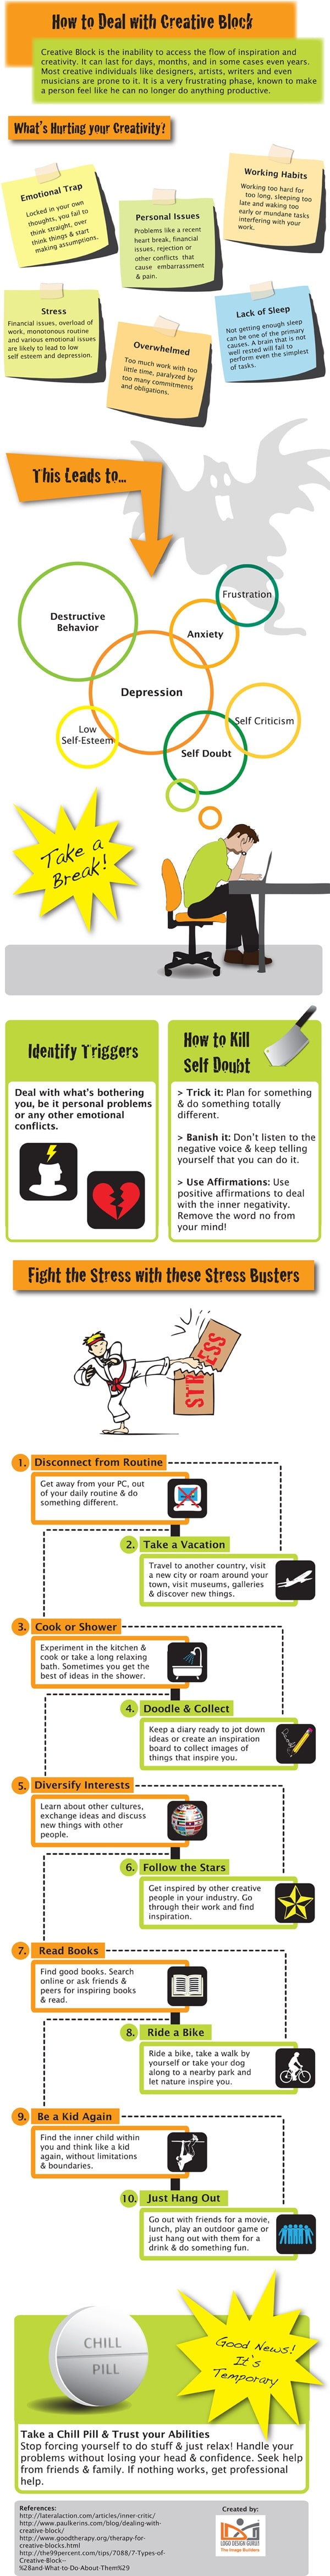 creative-block-cure-steps-infographic